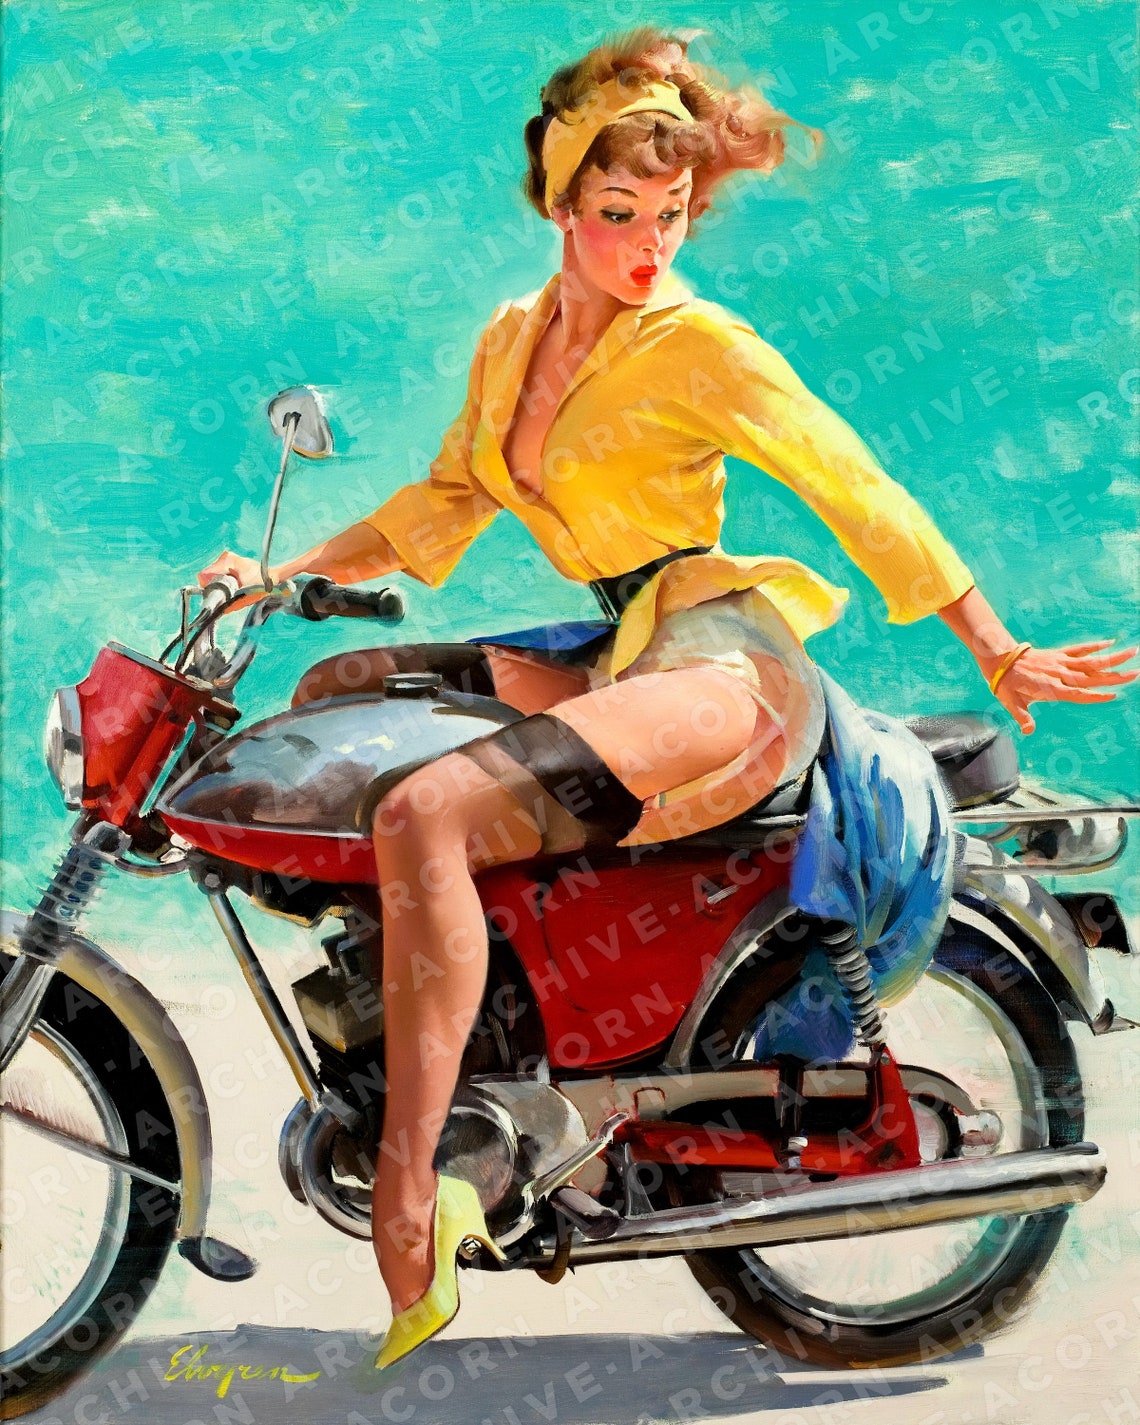 Pin Up Motorcycle Girl Hi Res 300 Dpi 8 X 10 Inches In Etsy 